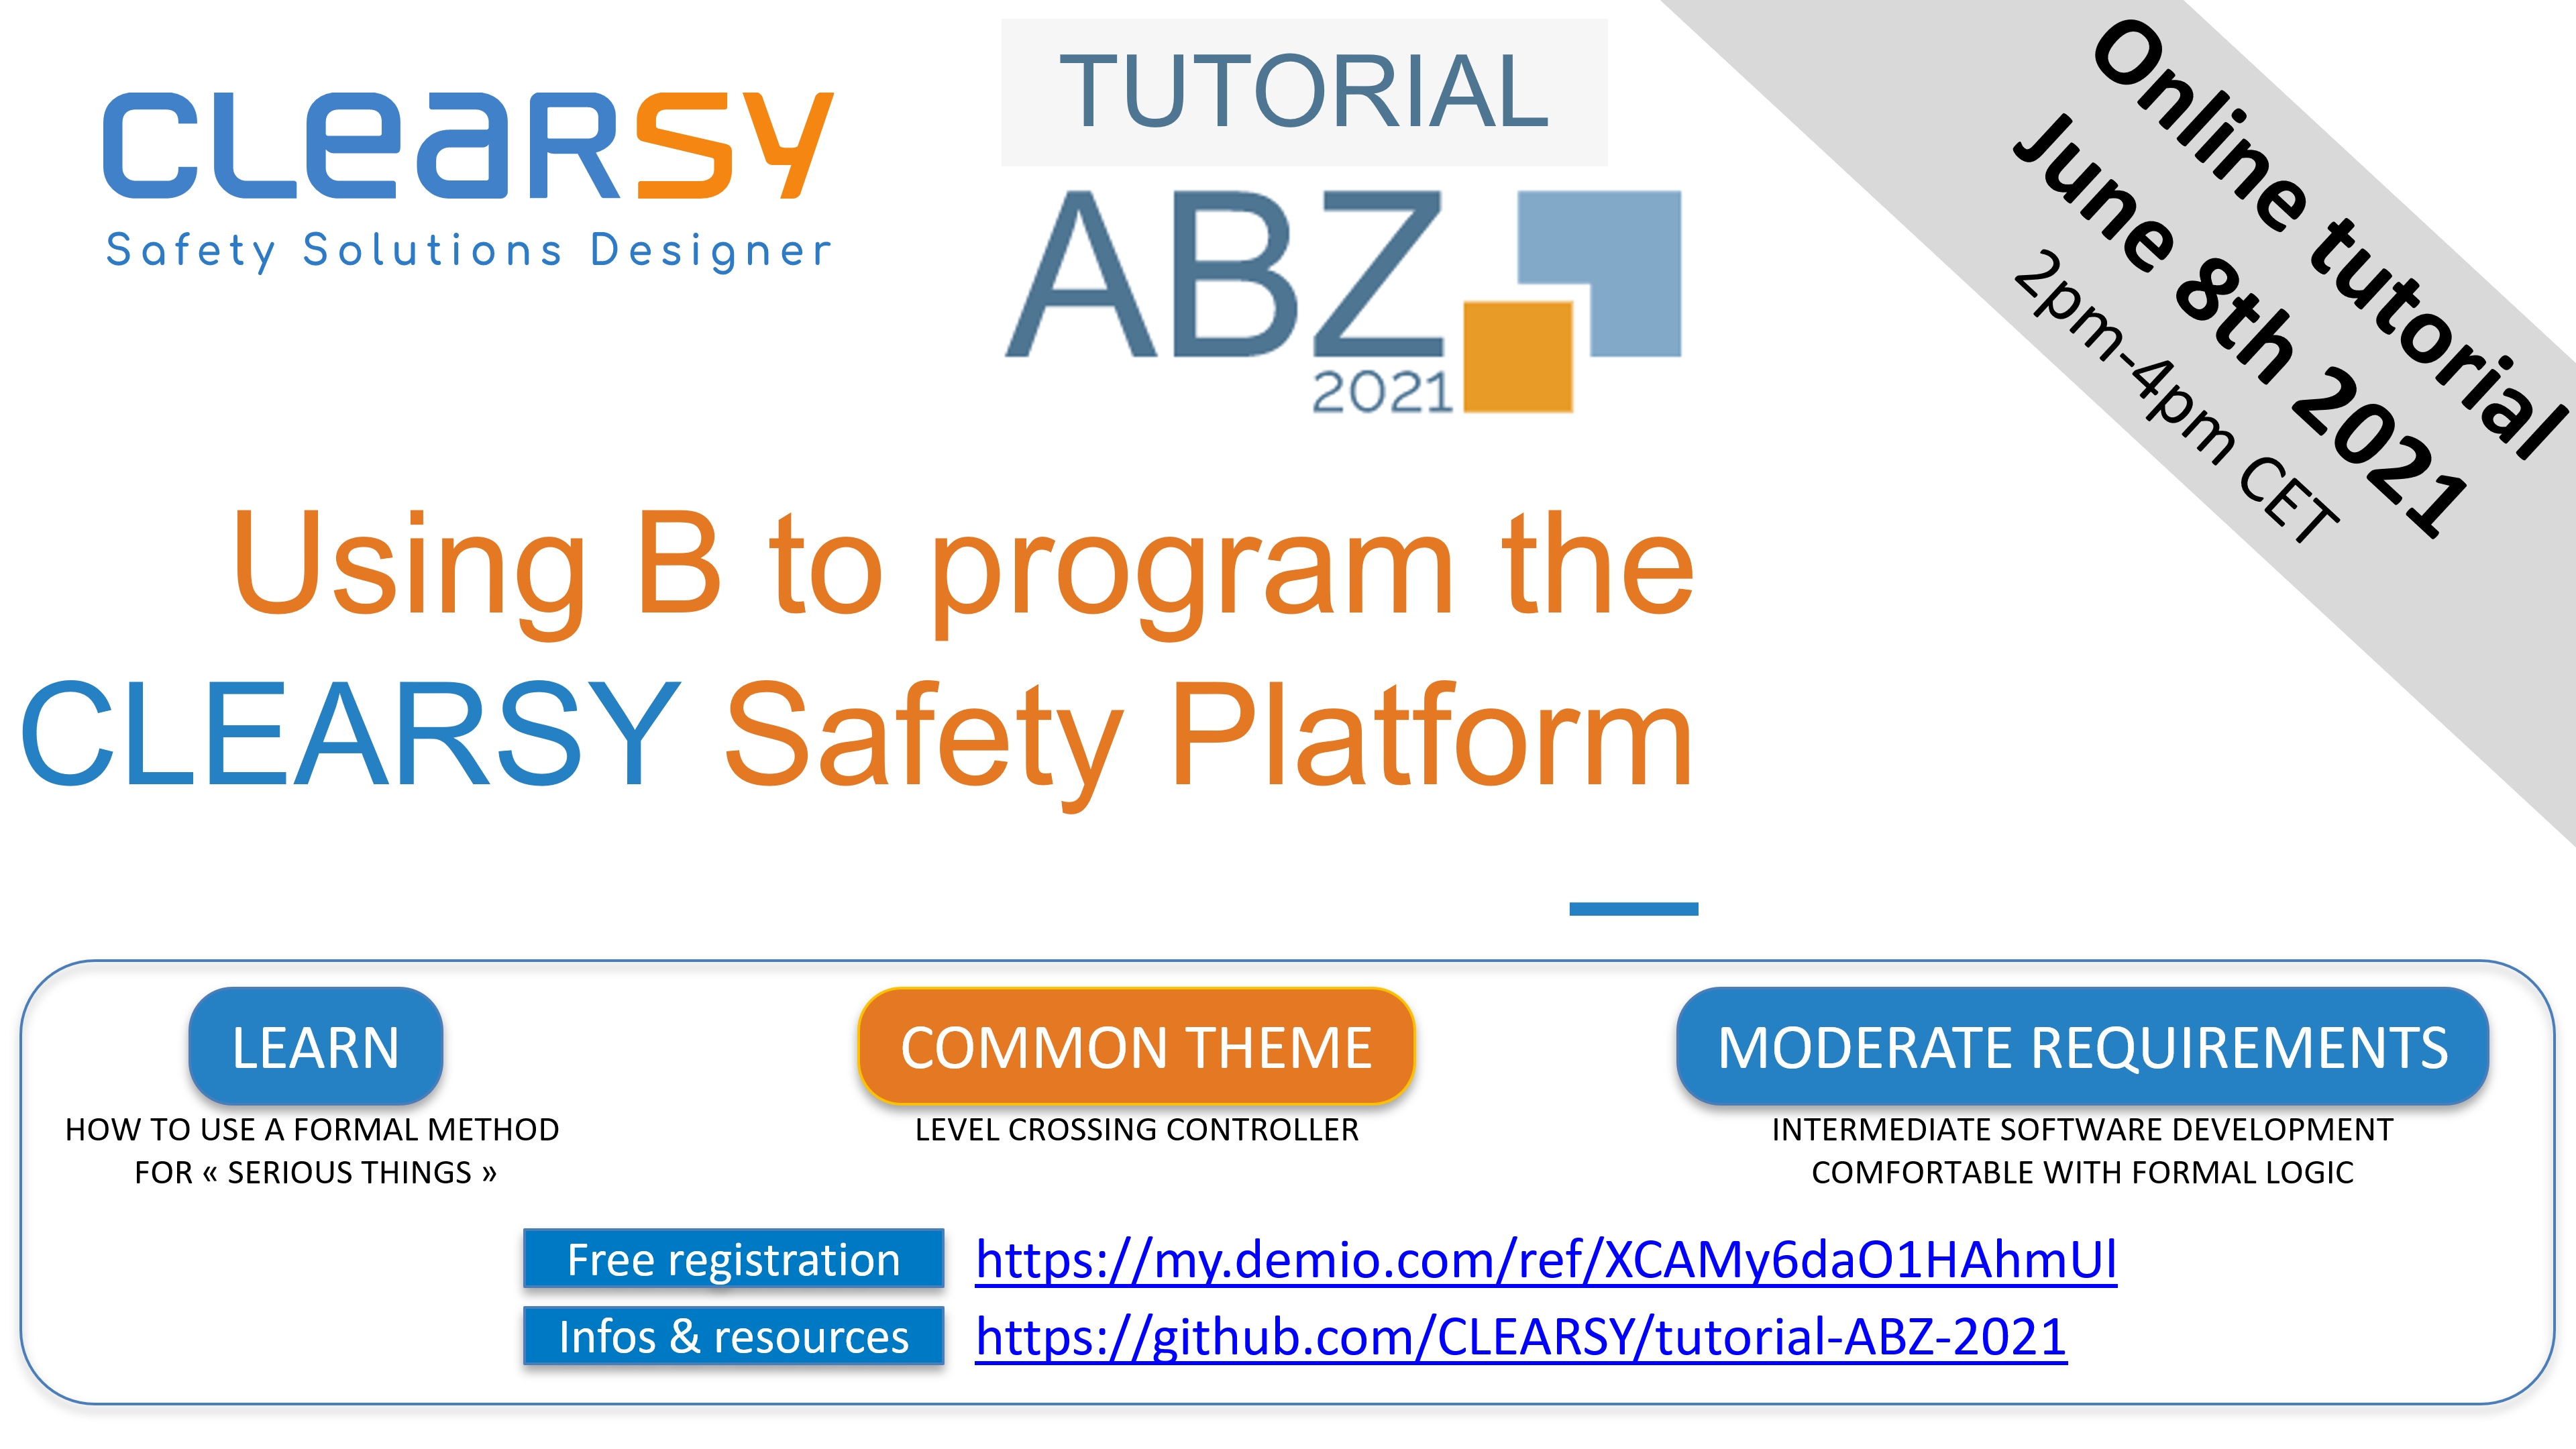 Tutorial “Using B to program the CLEARSY Safety Platform”